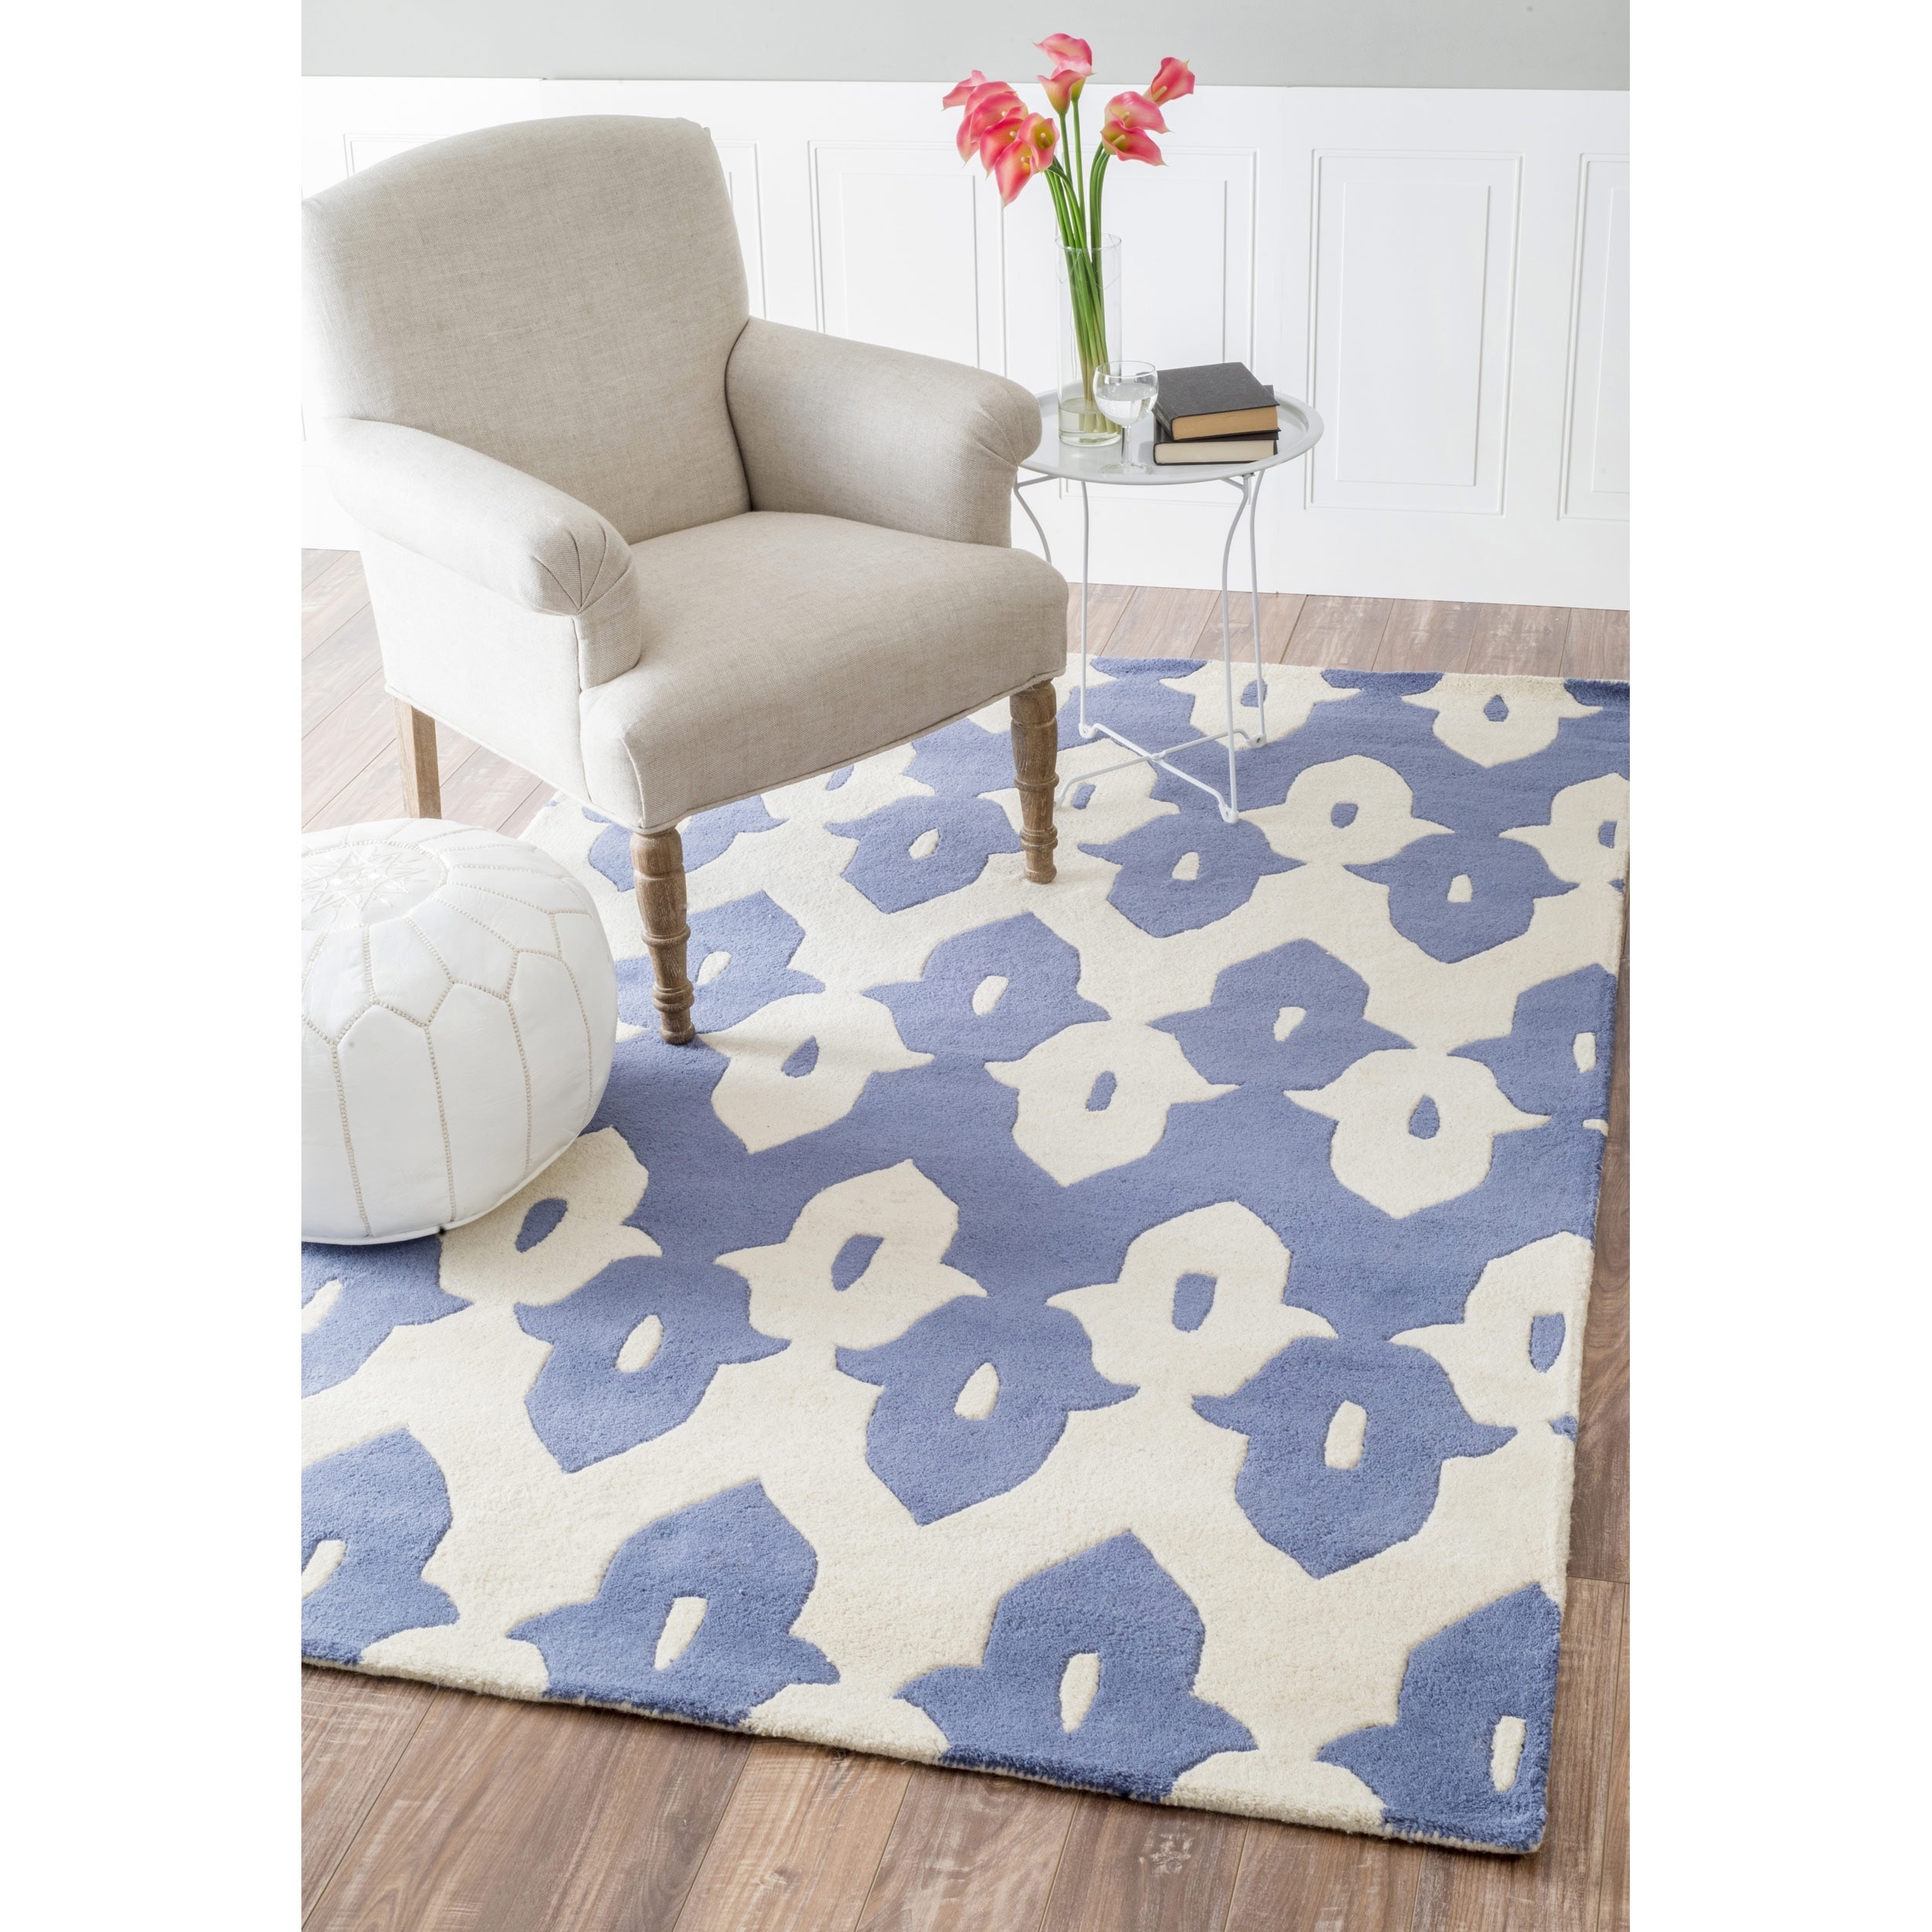 Nuloom Handmade Modern Ikat Trellis Wool Rug (3 X 5) (IvoryPattern AbstractTip We recommend the use of a non skid pad to keep the rug in place on smooth surfaces.All rug sizes are approximate. Due to the difference of monitor colors, some rug colors may